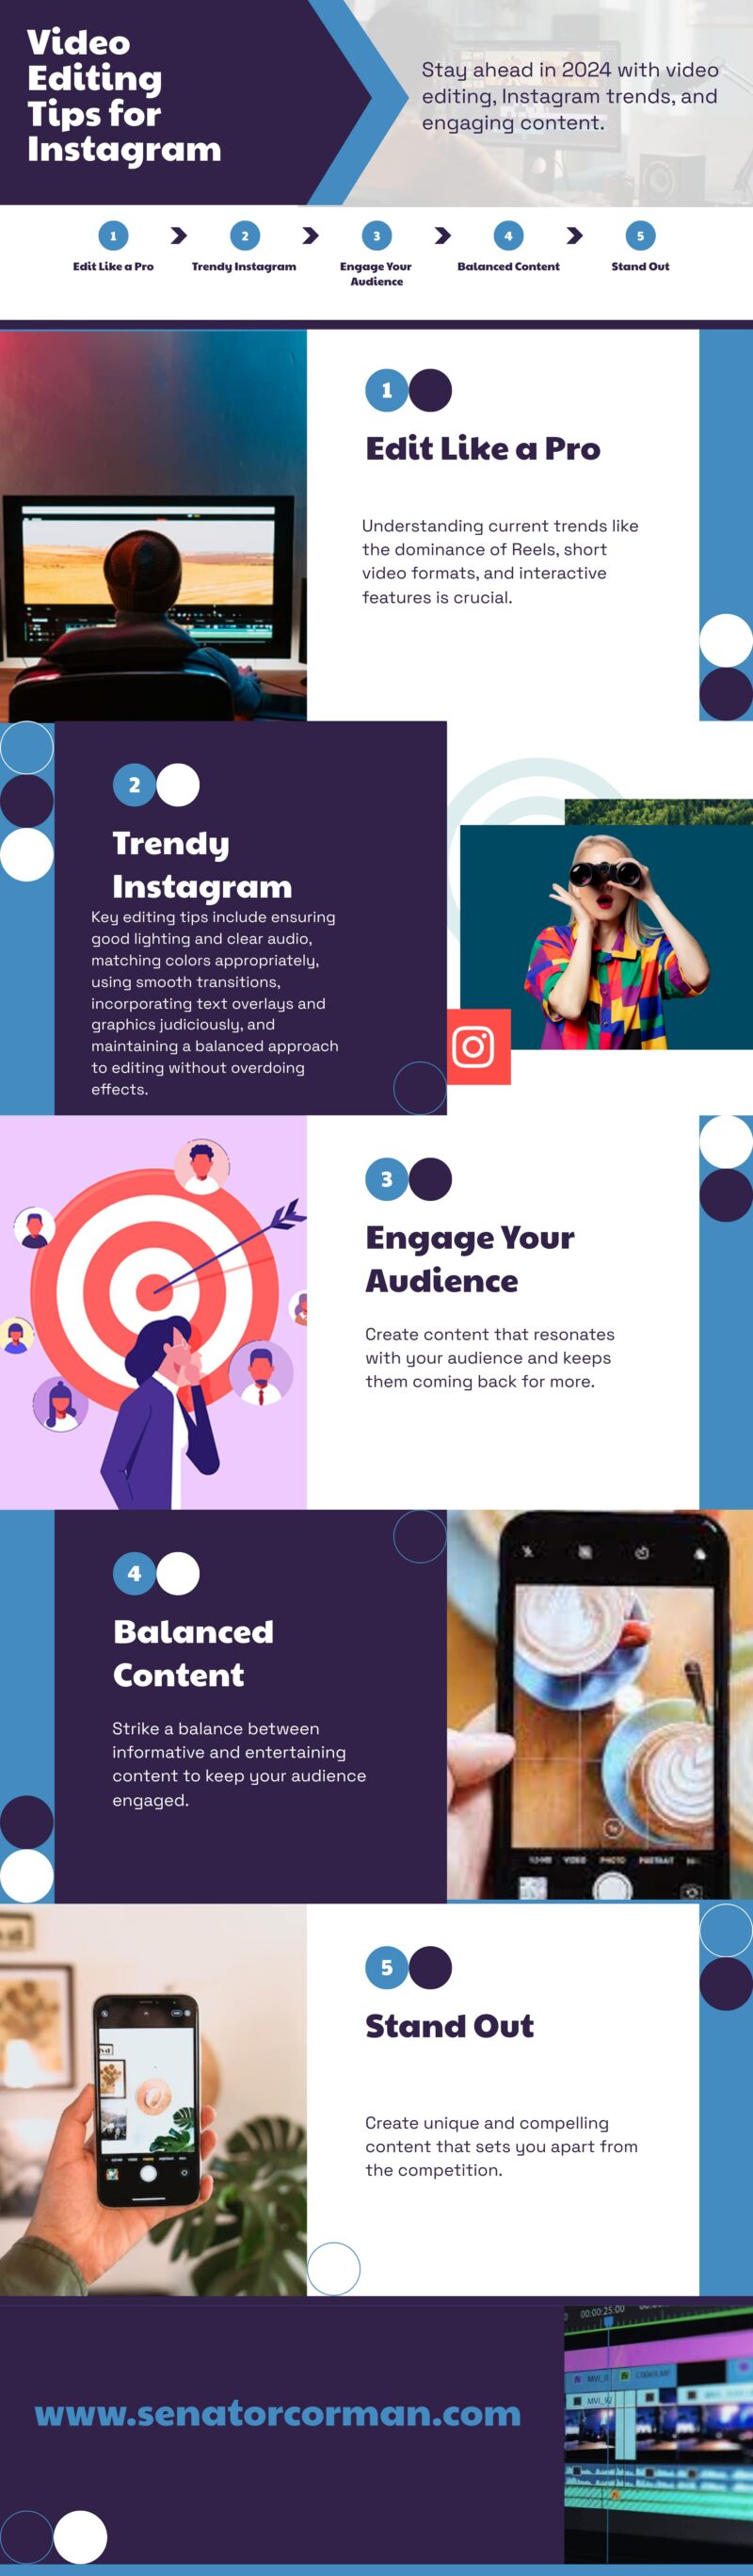 Video Editing Tips to Stand Out on Instagram infographic